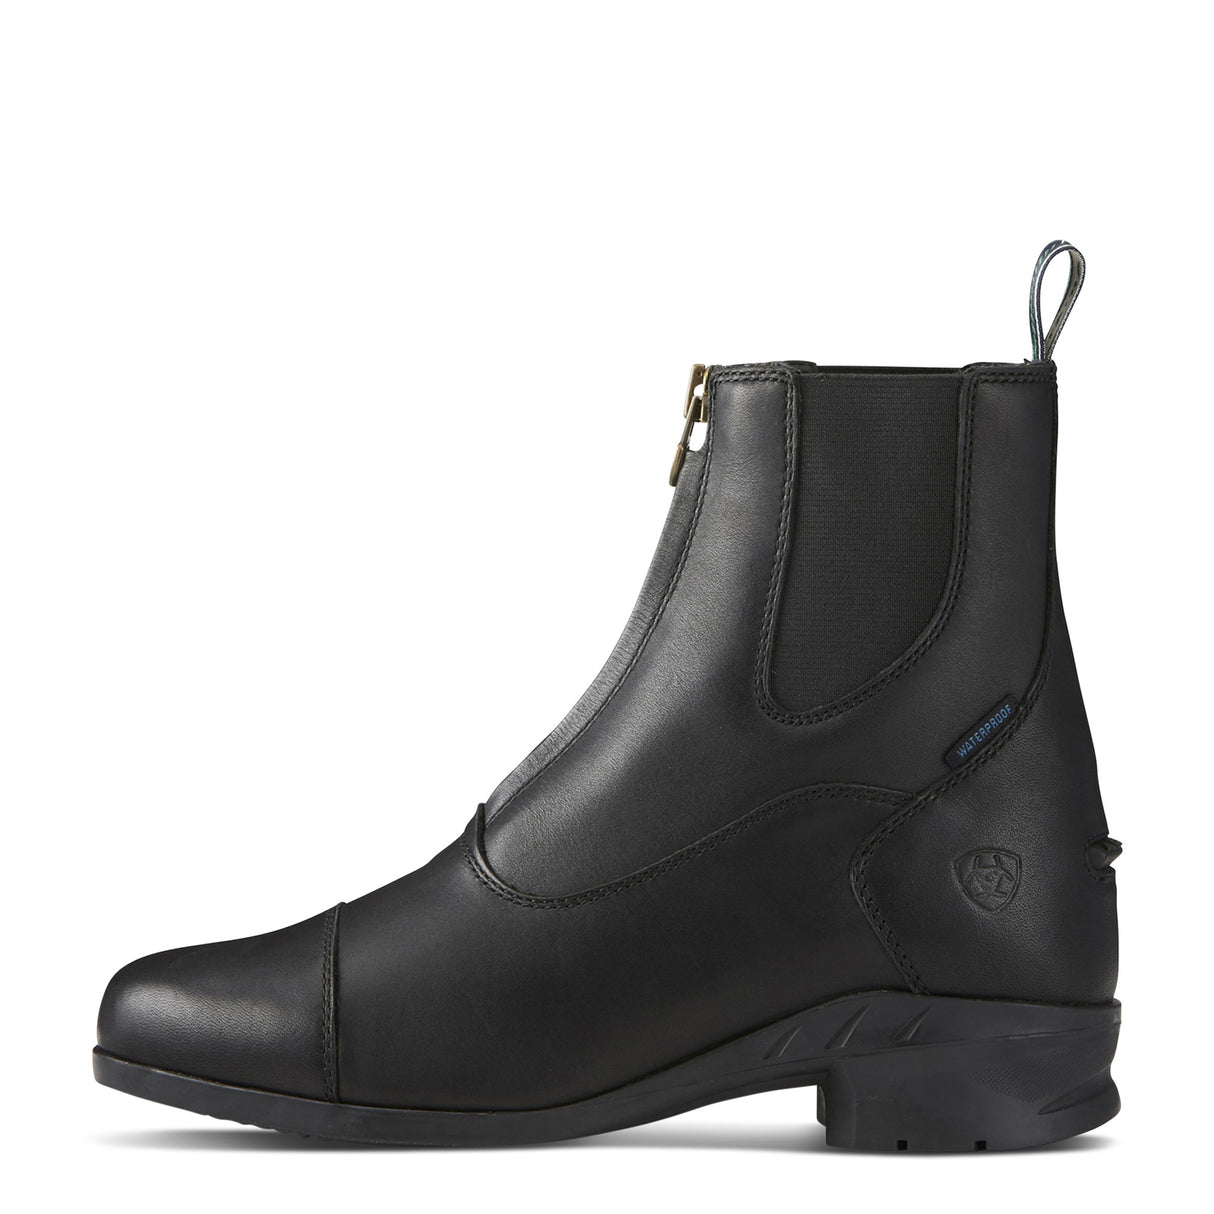 Ariat Heritage IV Zip H2O Paddock Boots